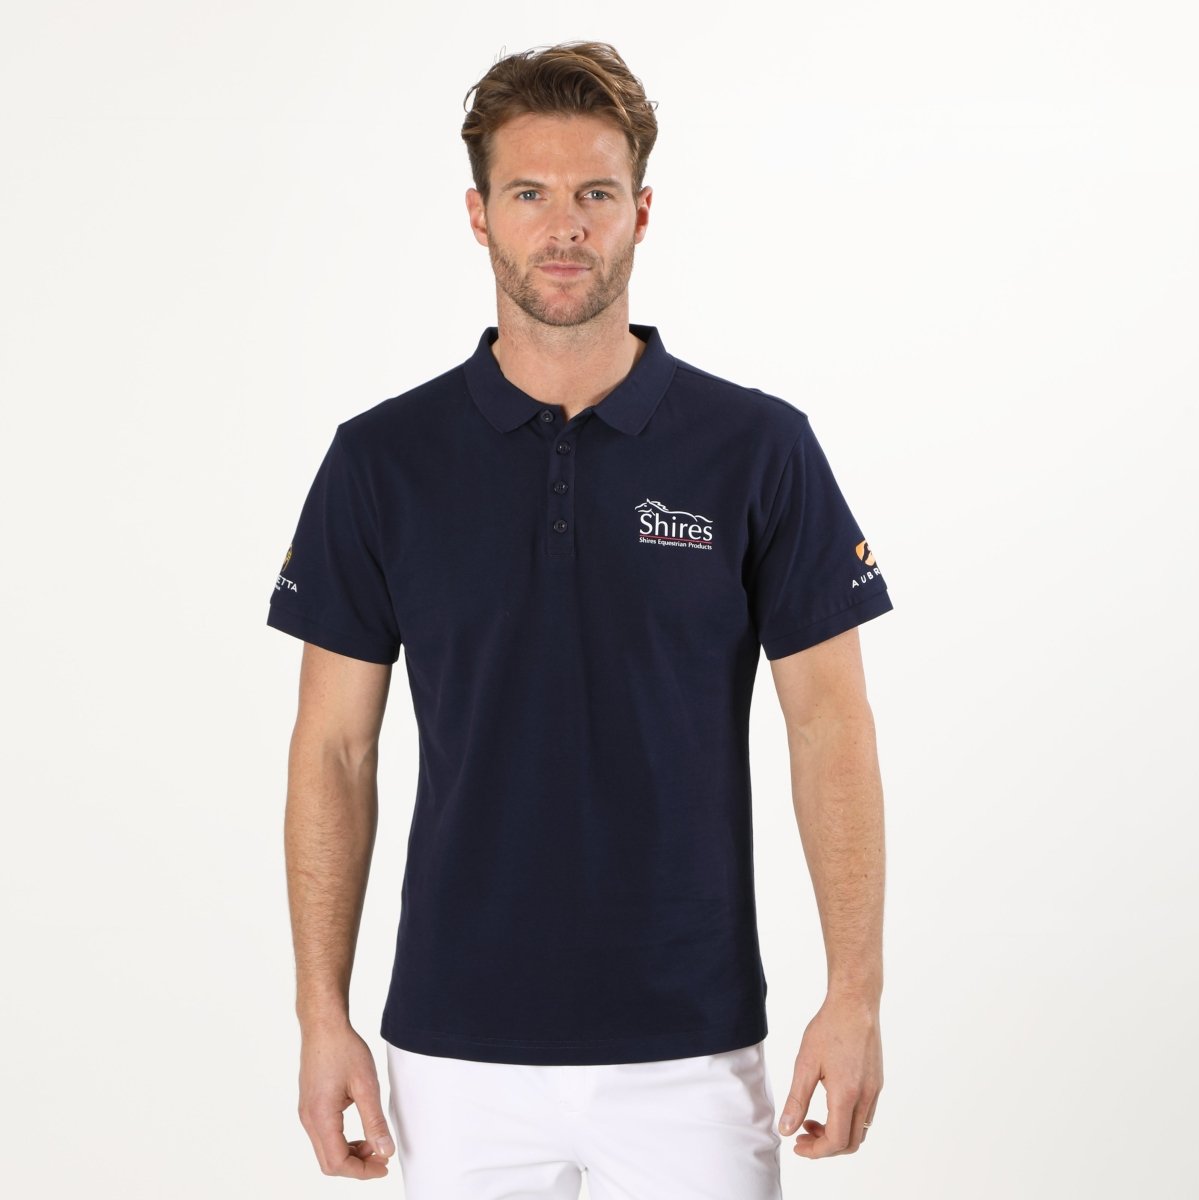 Aubrion Branded Polo Shirt - Gents - Navy - XL